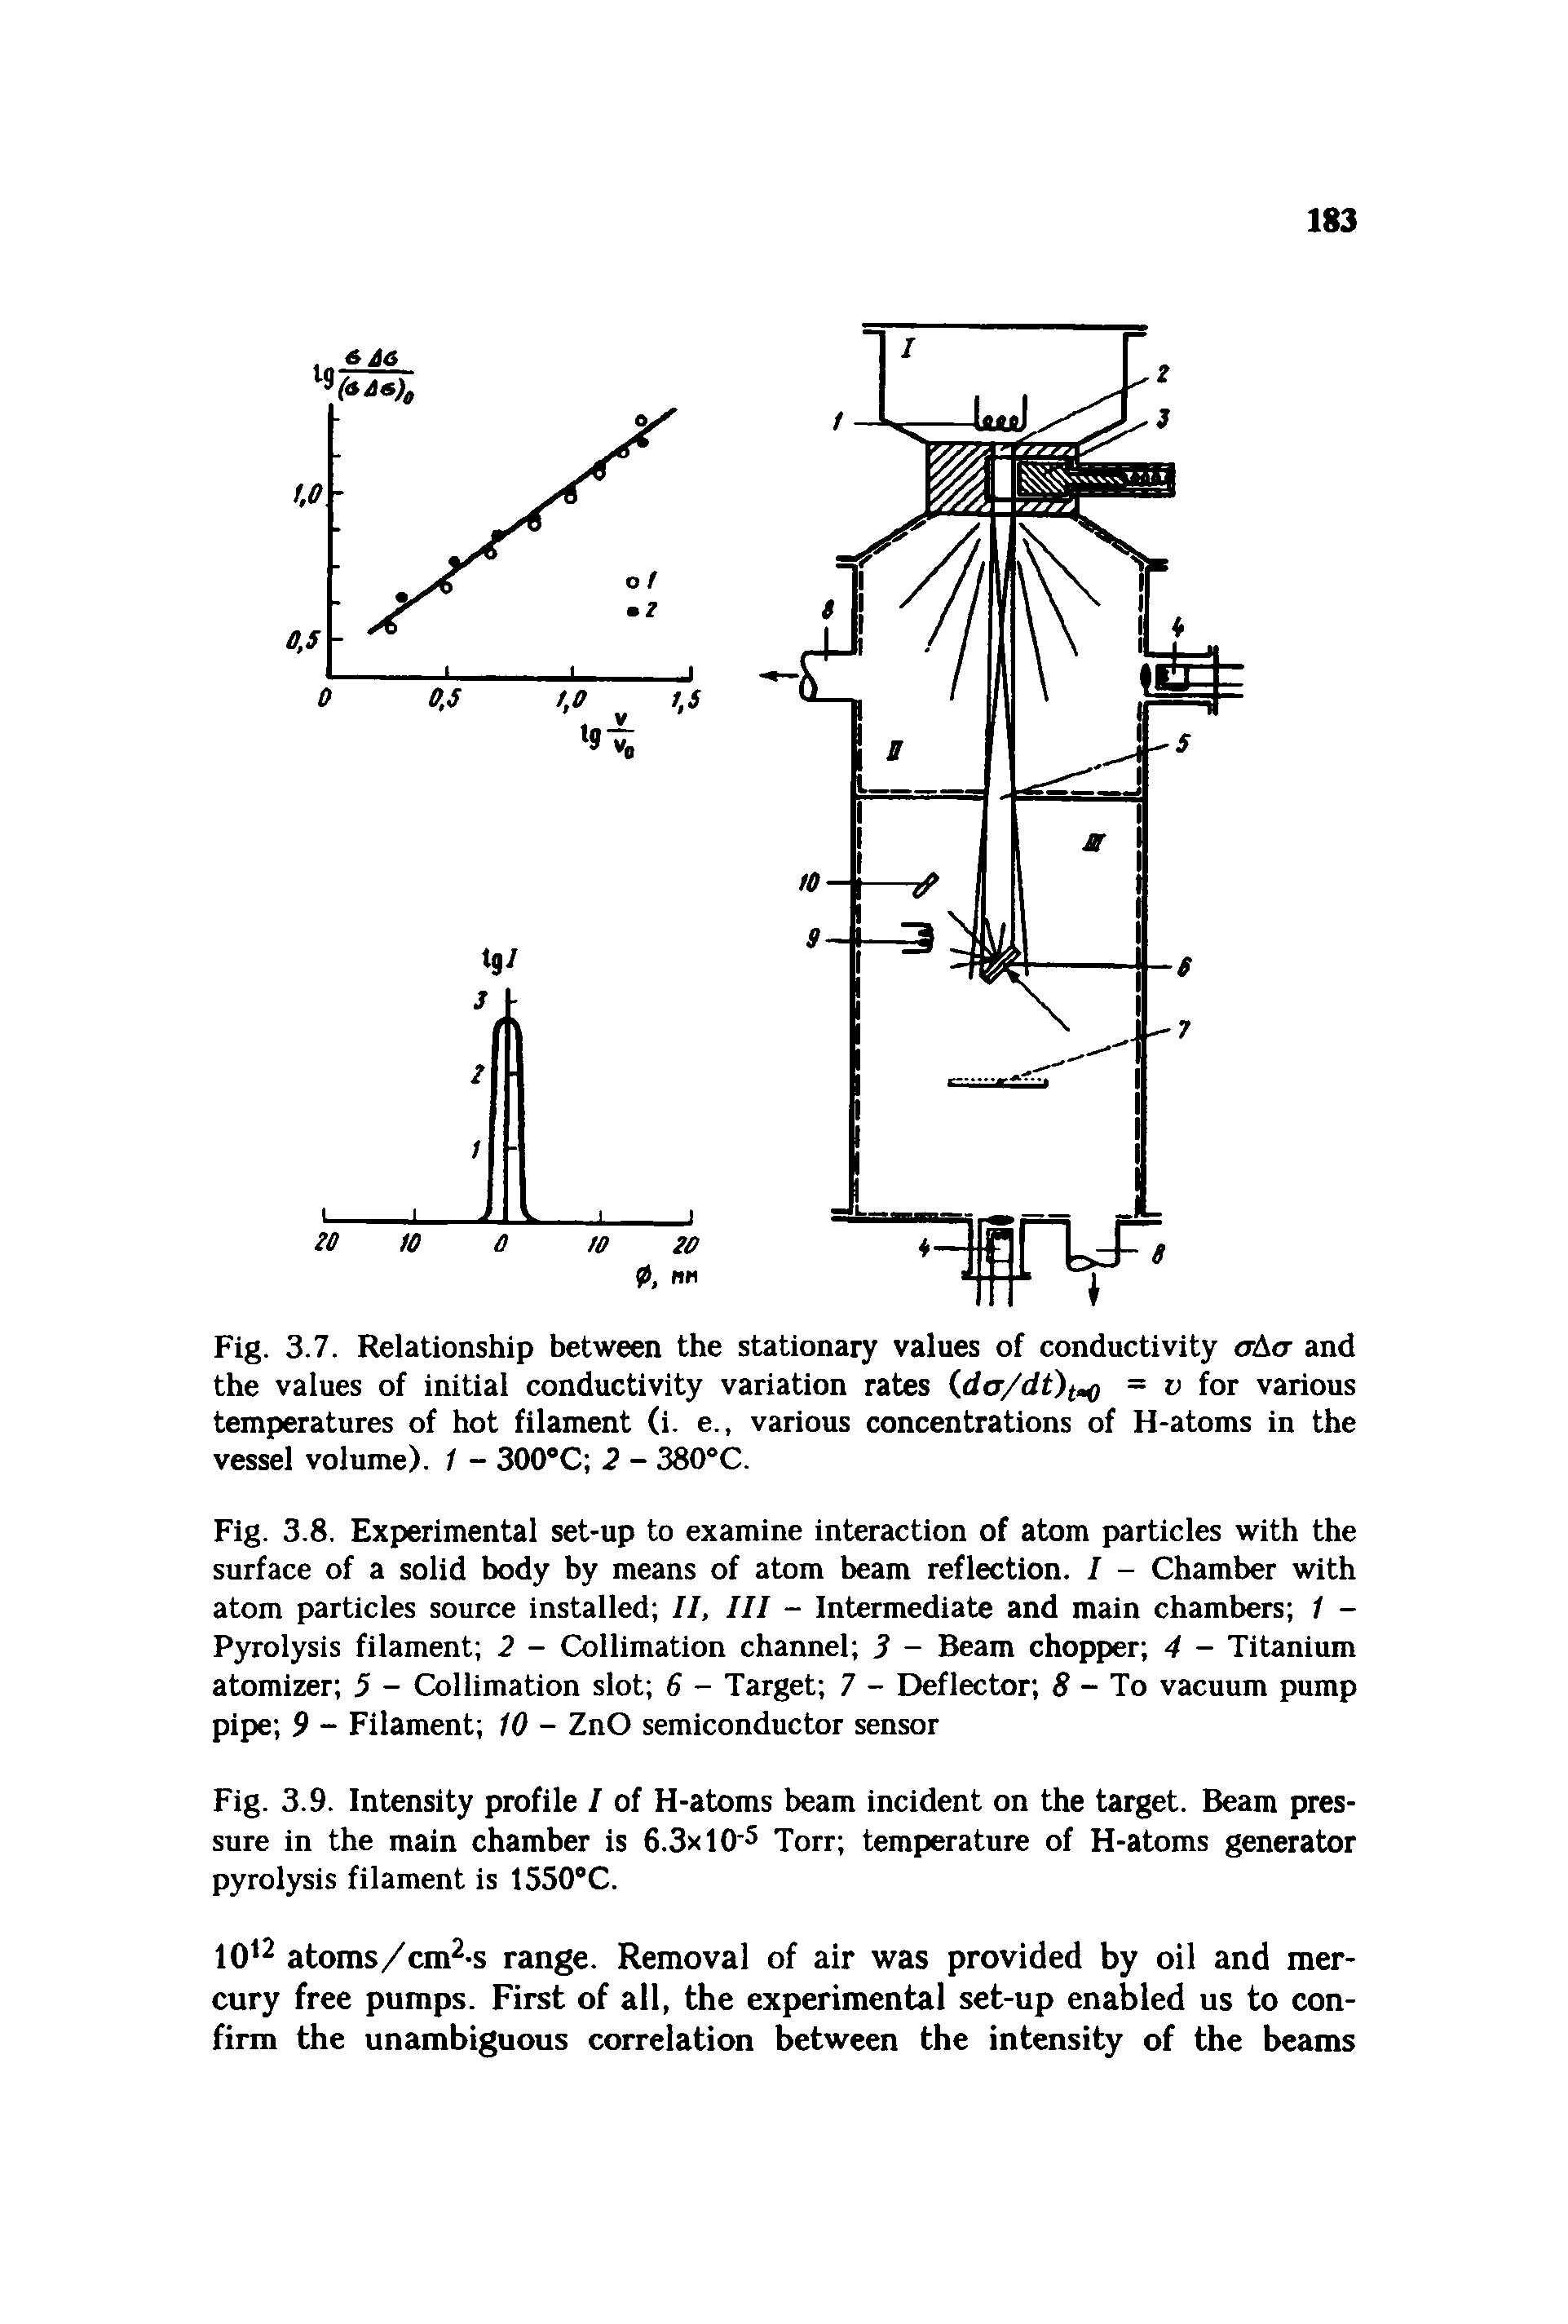 Fig. 3.8. Experimental set-up to examine interaction of atom particles with the surface of a solid body by means of atom beam reflection. I - Chamber with atom particles source installed II, III - Intermediate and main chambers / -Pyrolysis filament 2 - Collimation channel 3 - Beam chopper 4 - Titanium atomizer 5 - Collimation slot 6 - Target 7 - Deflector 8 - To vacuum pump pipe 9 - Filament 10 - ZnO semiconductor sensor...